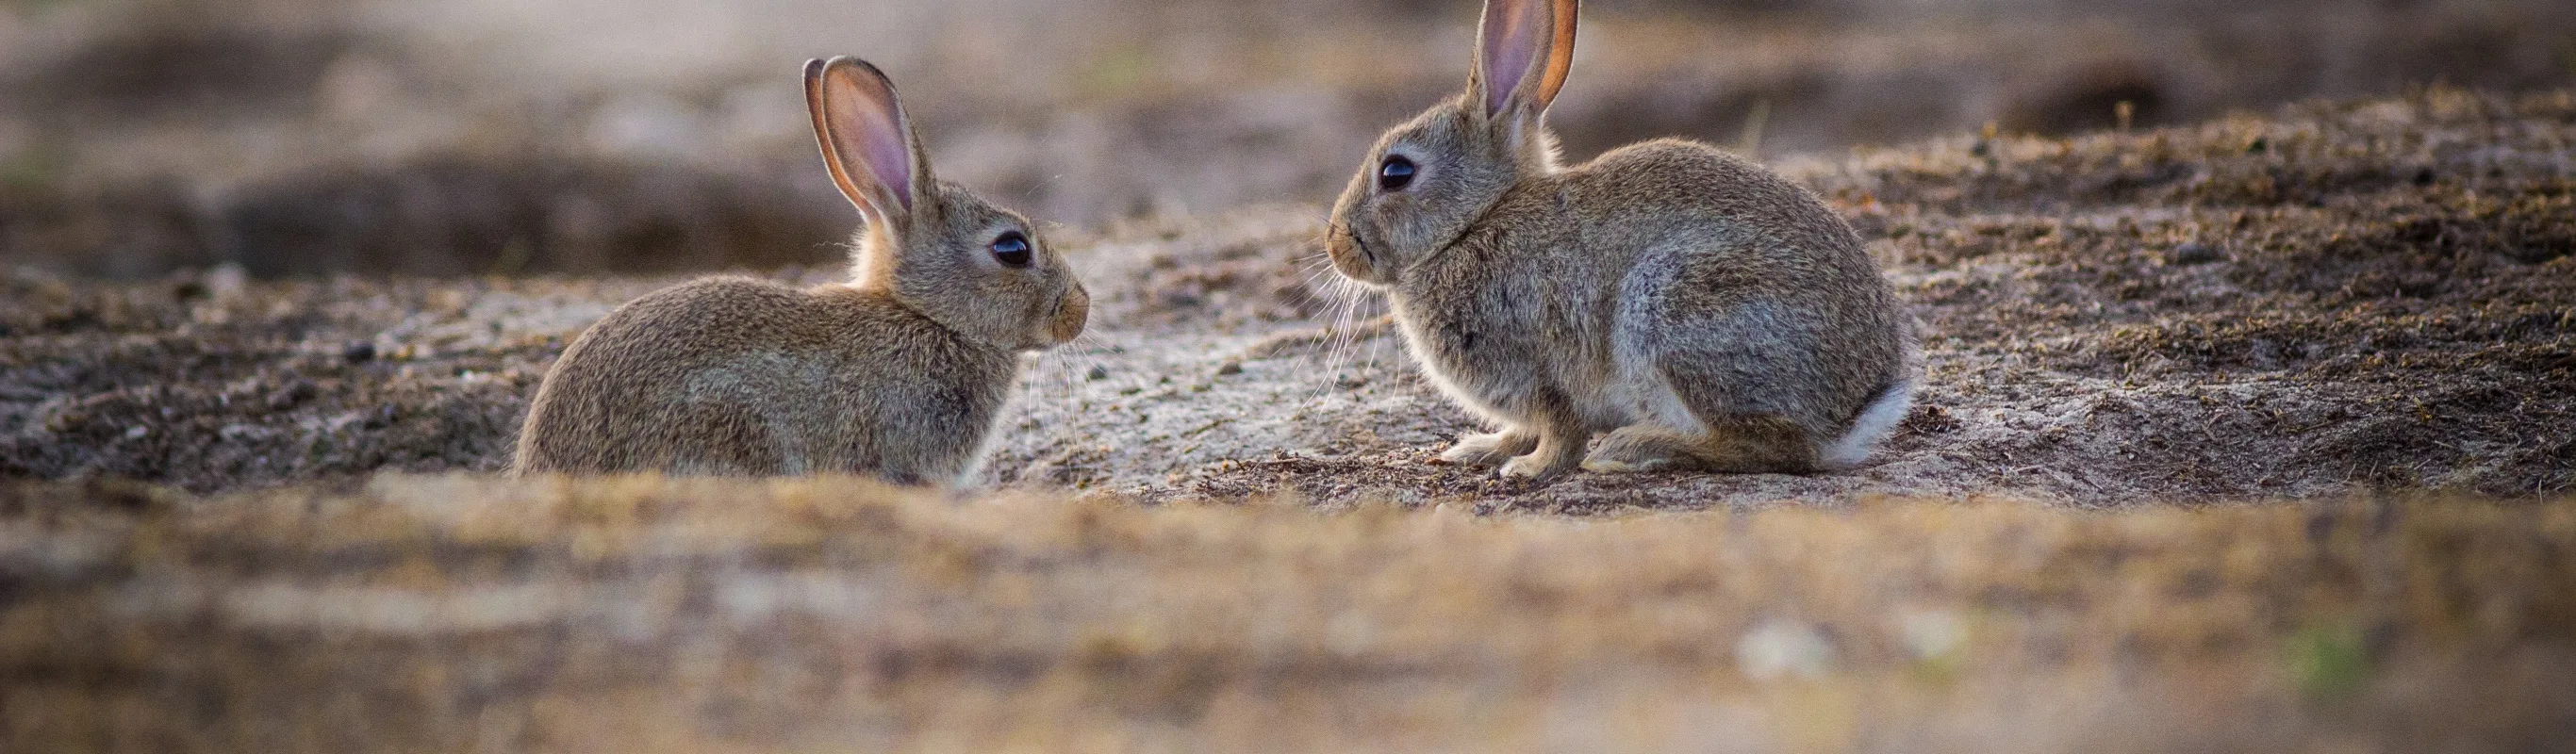 Two desert bunnies sitting with each other in an open desert field